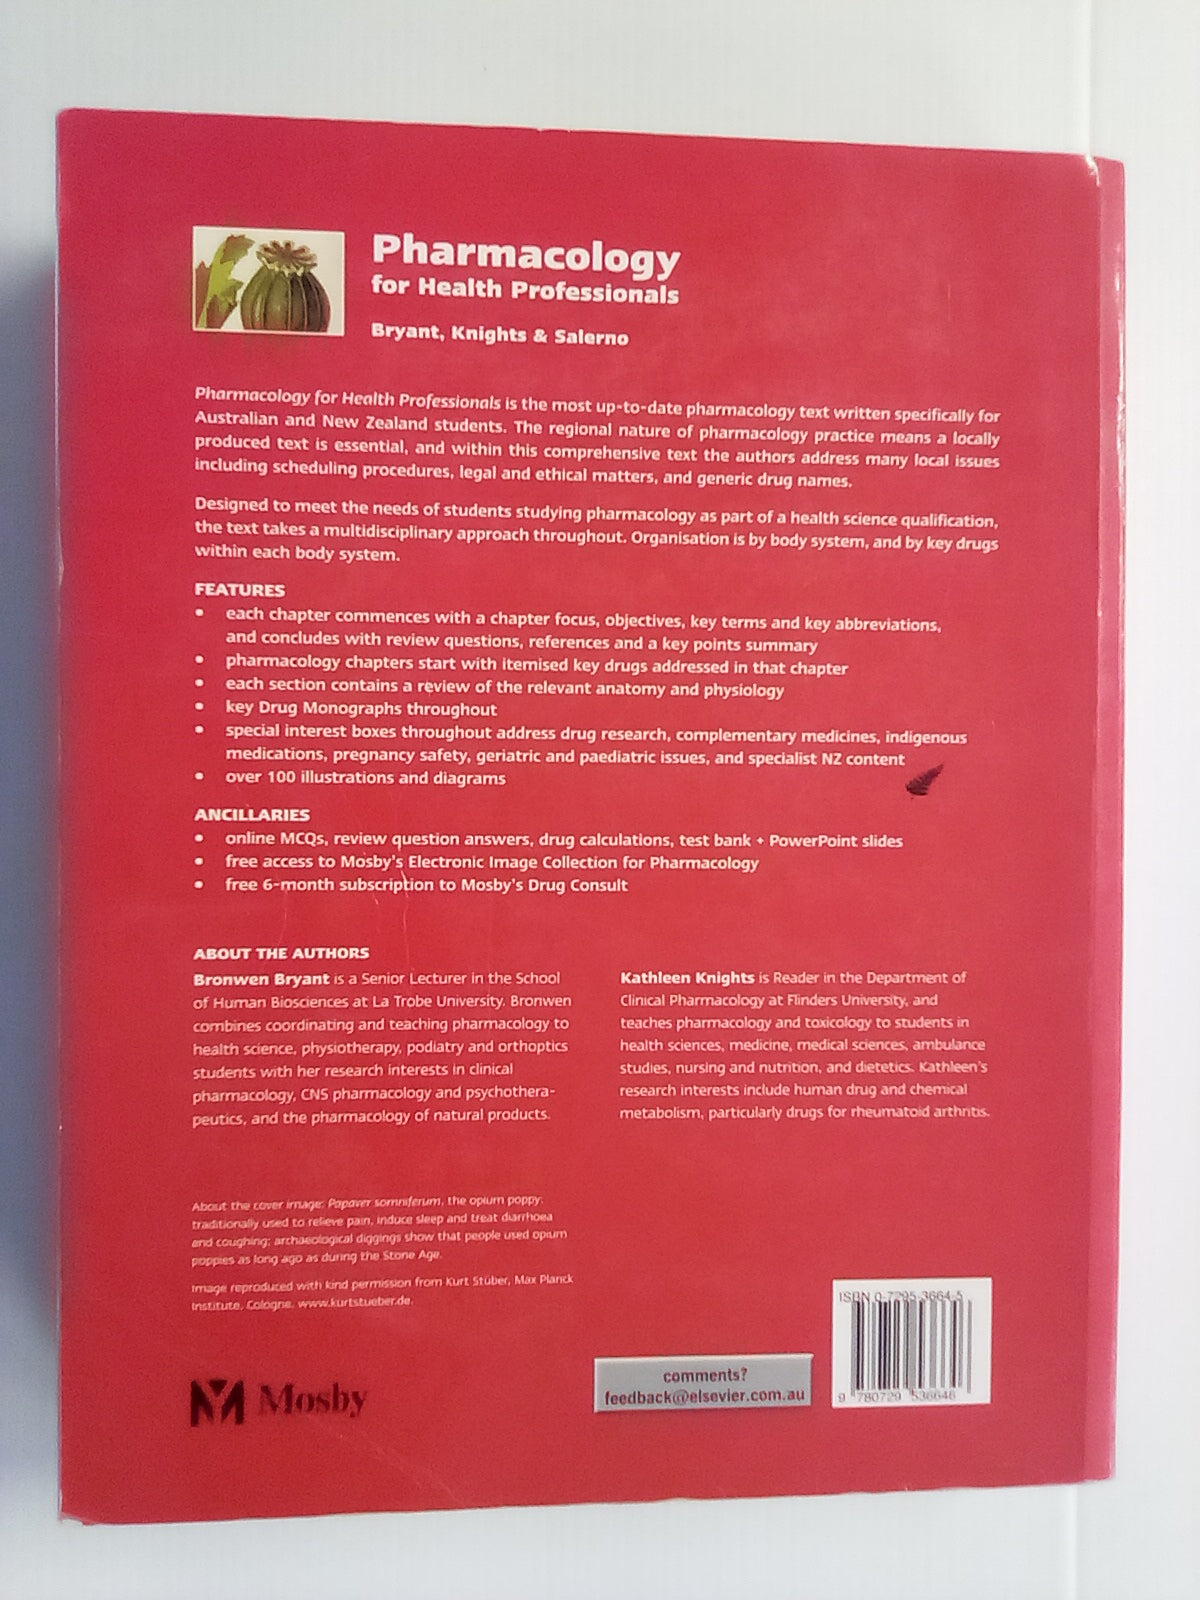 Pharmacology For Health Professionals (2003) by Bryant, Knights, & Salerno